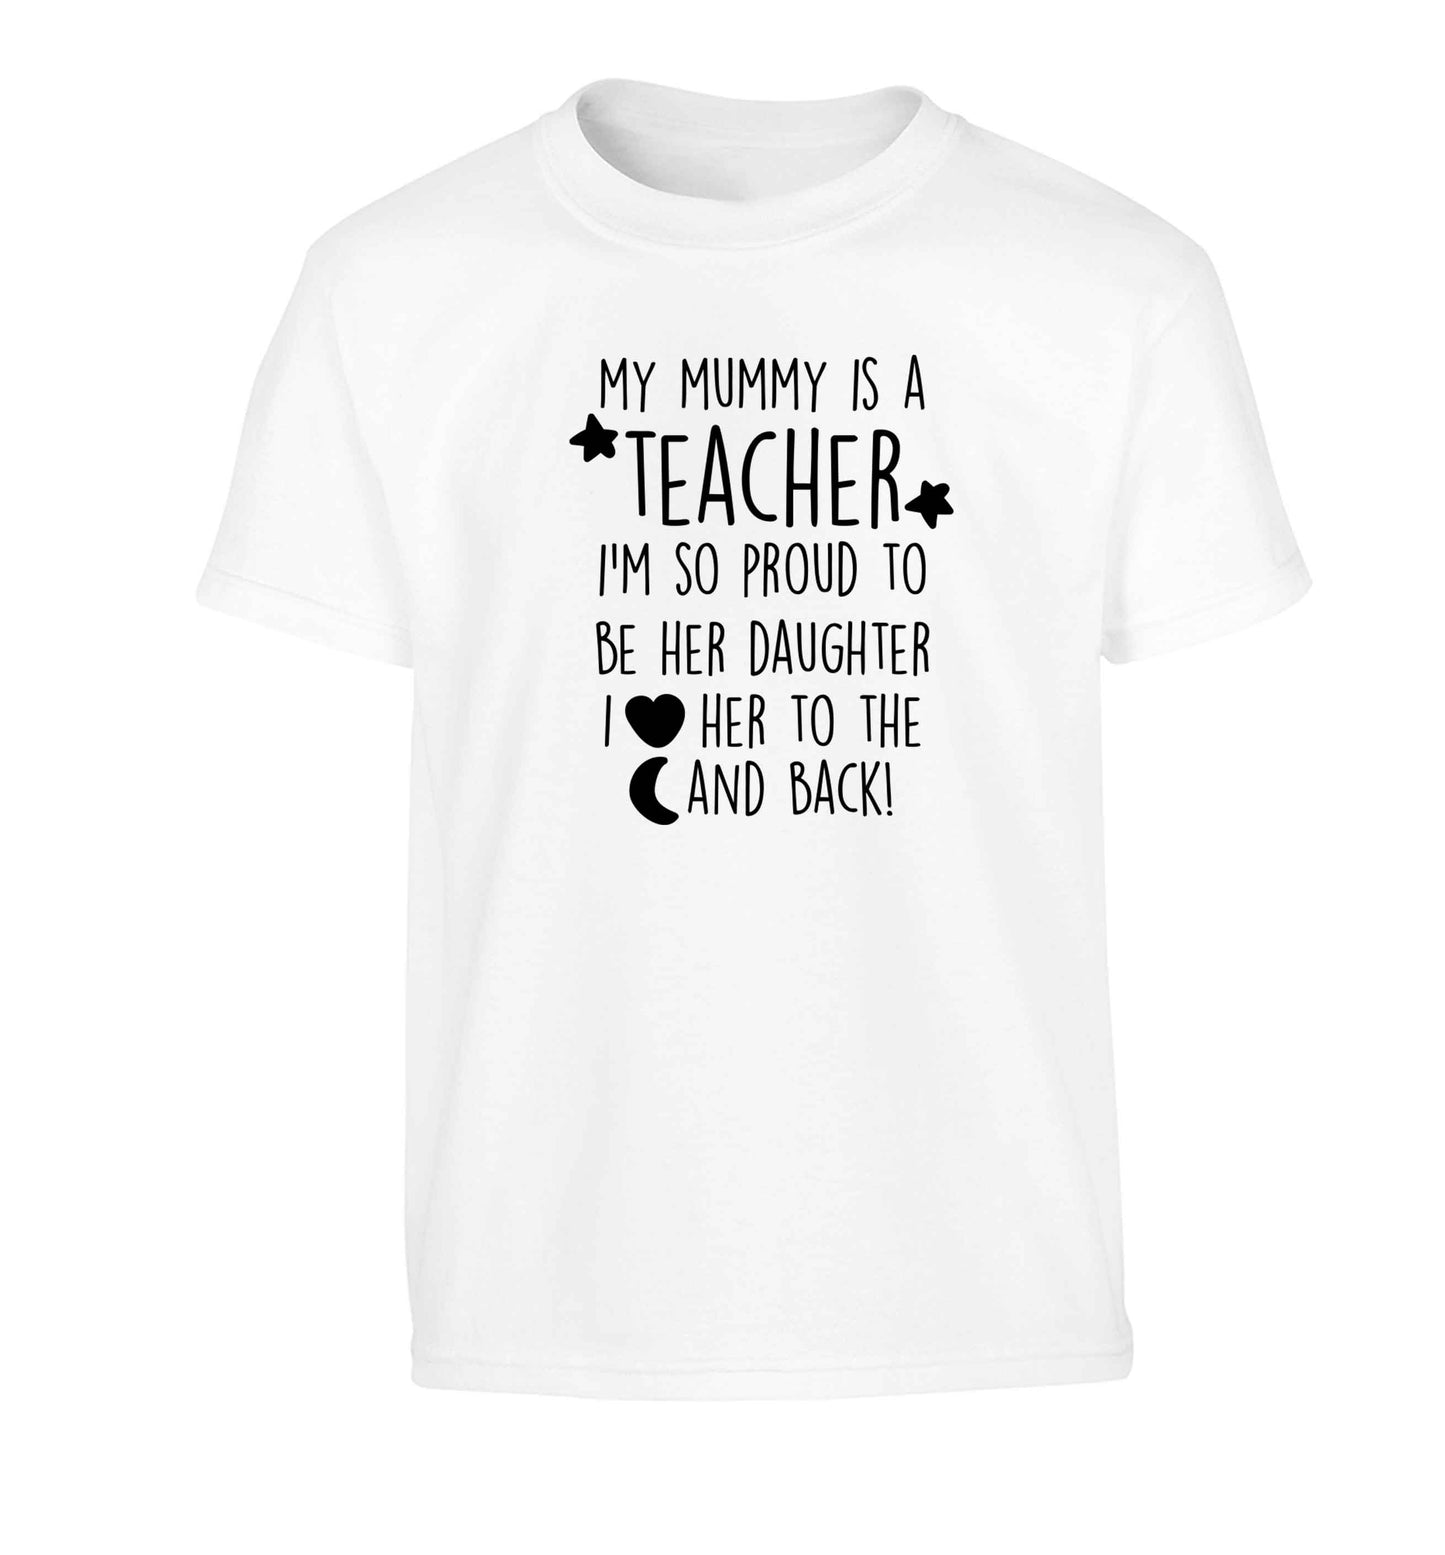 My mummy is a teacher I'm so proud to be her daughter I love her to the moon and back Children's white Tshirt 12-13 Years